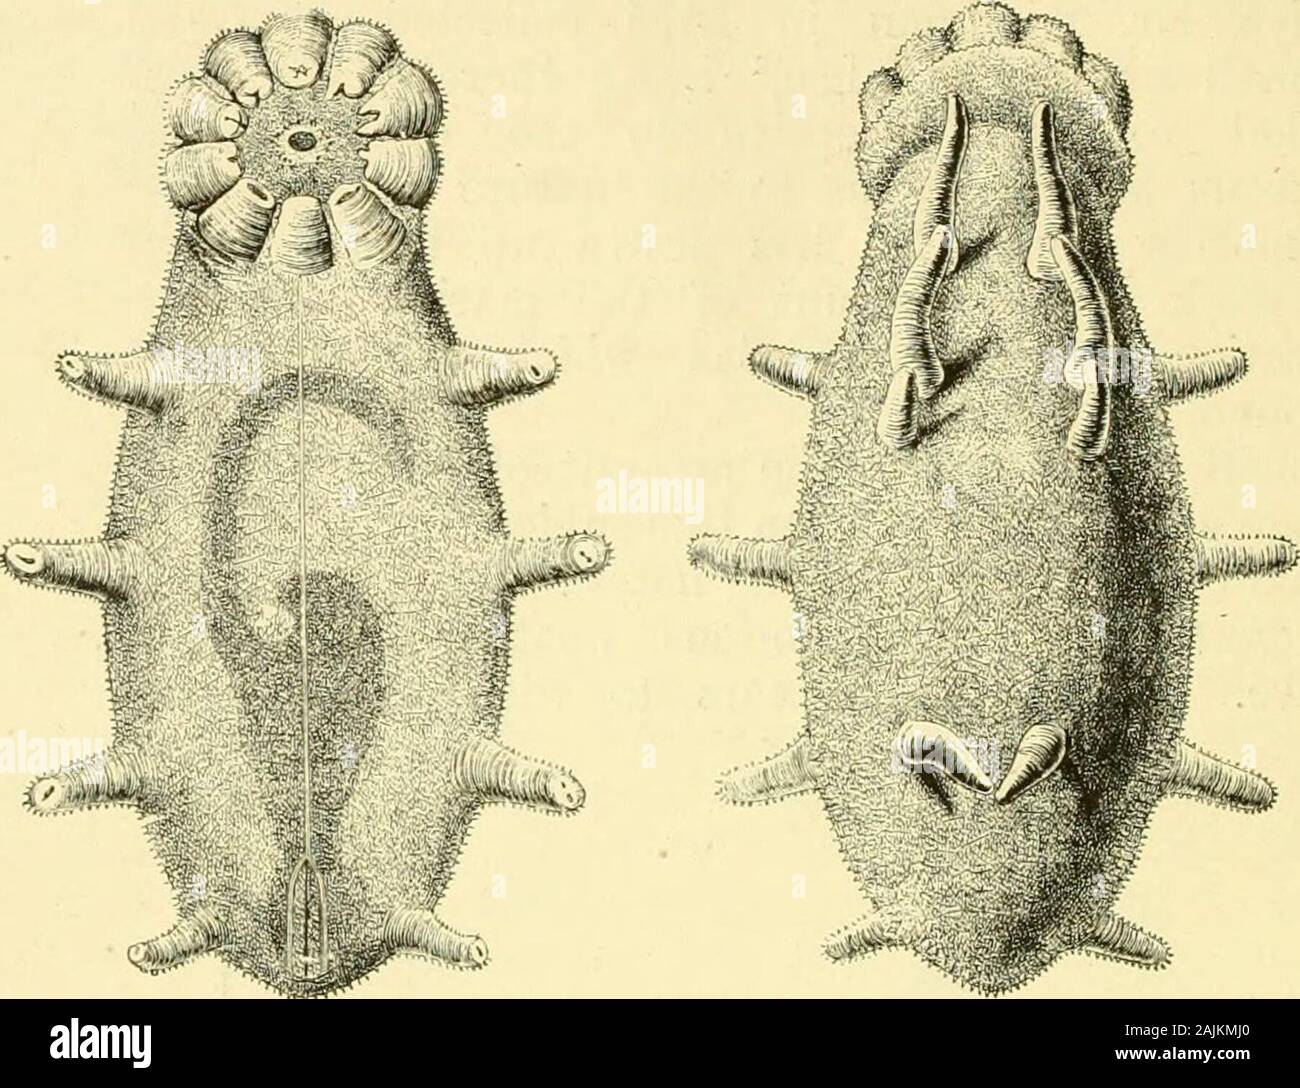 The voyage of the Vega round Asia and Europe; with a historical review of previous journeys along the north coast of the Old World . UMBELLPLA FROM THE KARA SEA. A. Polype stem entire, one-half the natural size. a B, Polype stem, upper part, one-and-a-half times the natural size. ^ Already in 1771 one of Pallas companions, the student Sujeff, foundlarge algae in the Kara Sea (Pallas, Reise. St. Petersburg, 1771—1776,iii. p. 34). 142 THE VOYAGE OF THE VEGA. [chap.. kJ0^. ELPIDIA GLACIALIS (tHEEL), FROM THE KARA SEA. Magnified three times.A. Belly. B, Bnck. Stock Photo